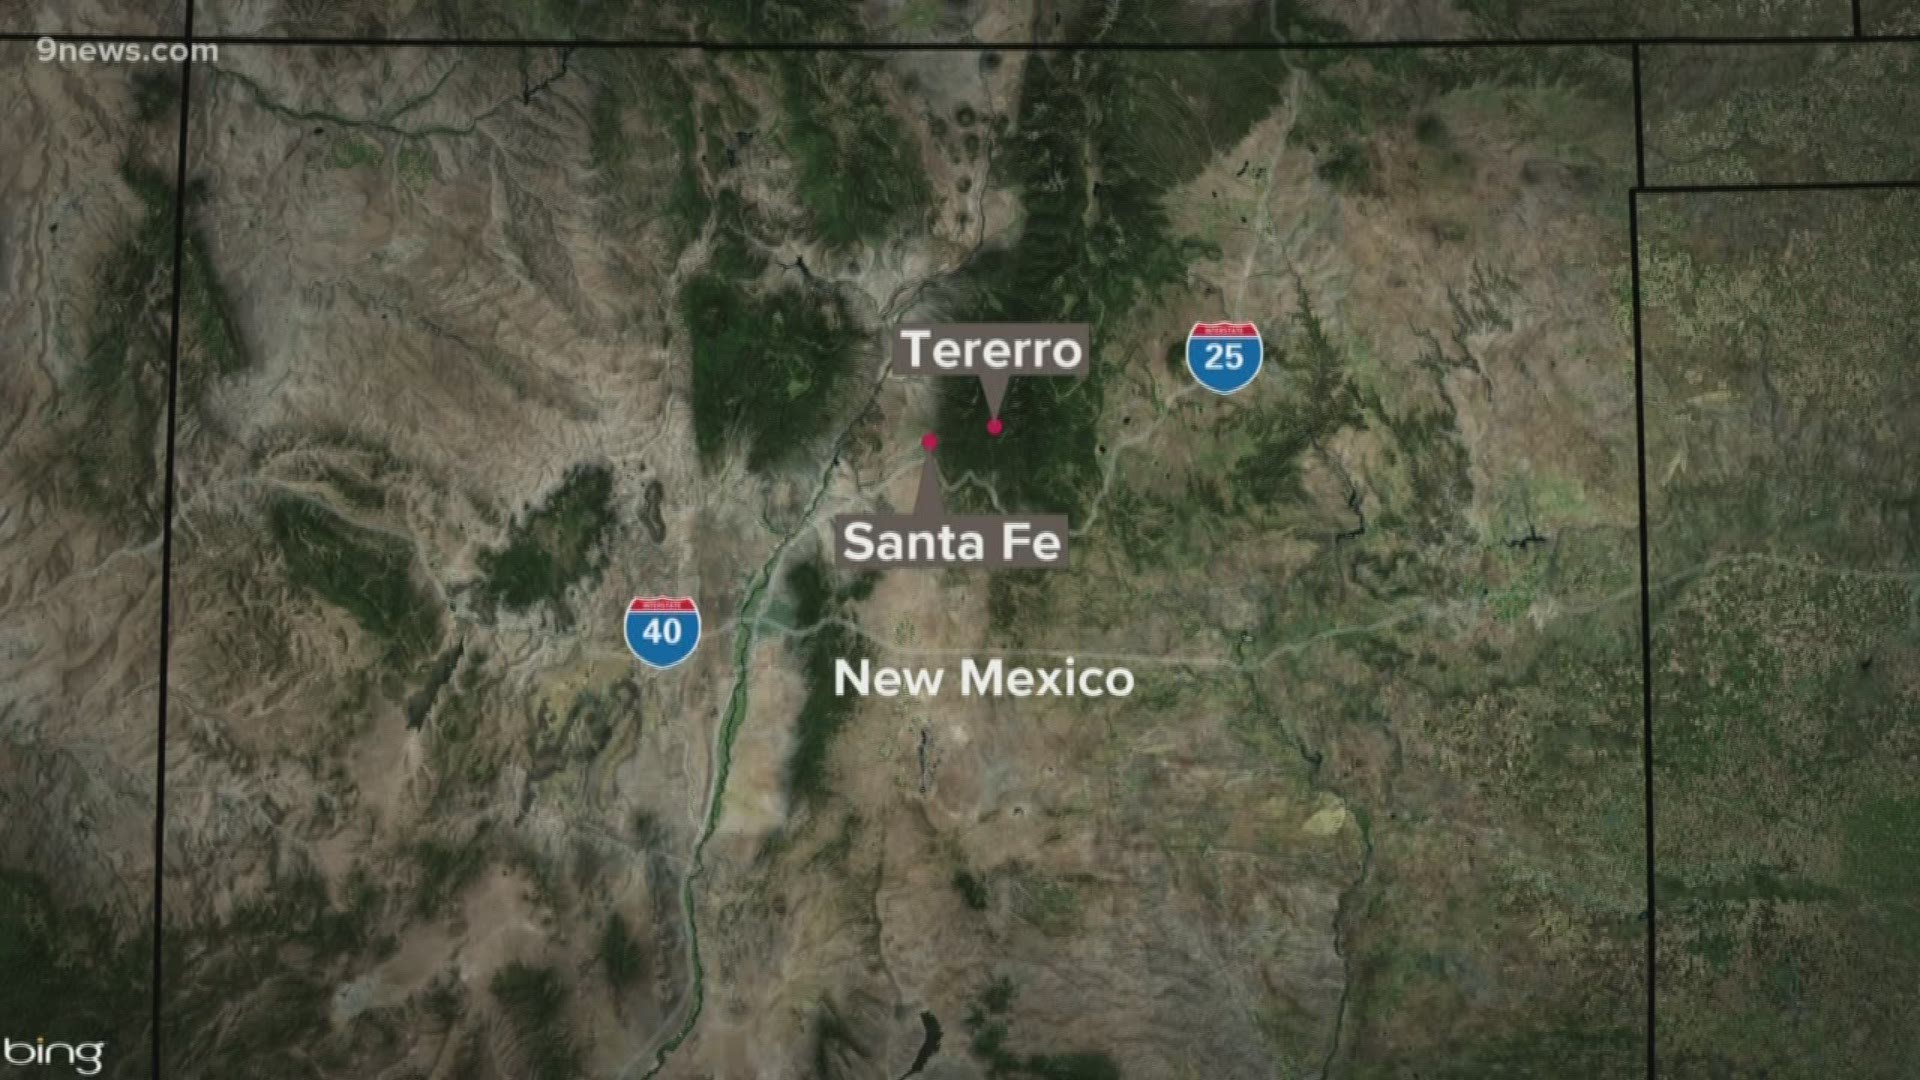 The single-engine aircraft lost contact with the Santa Fe airport around 6 p.m. Thursday night.